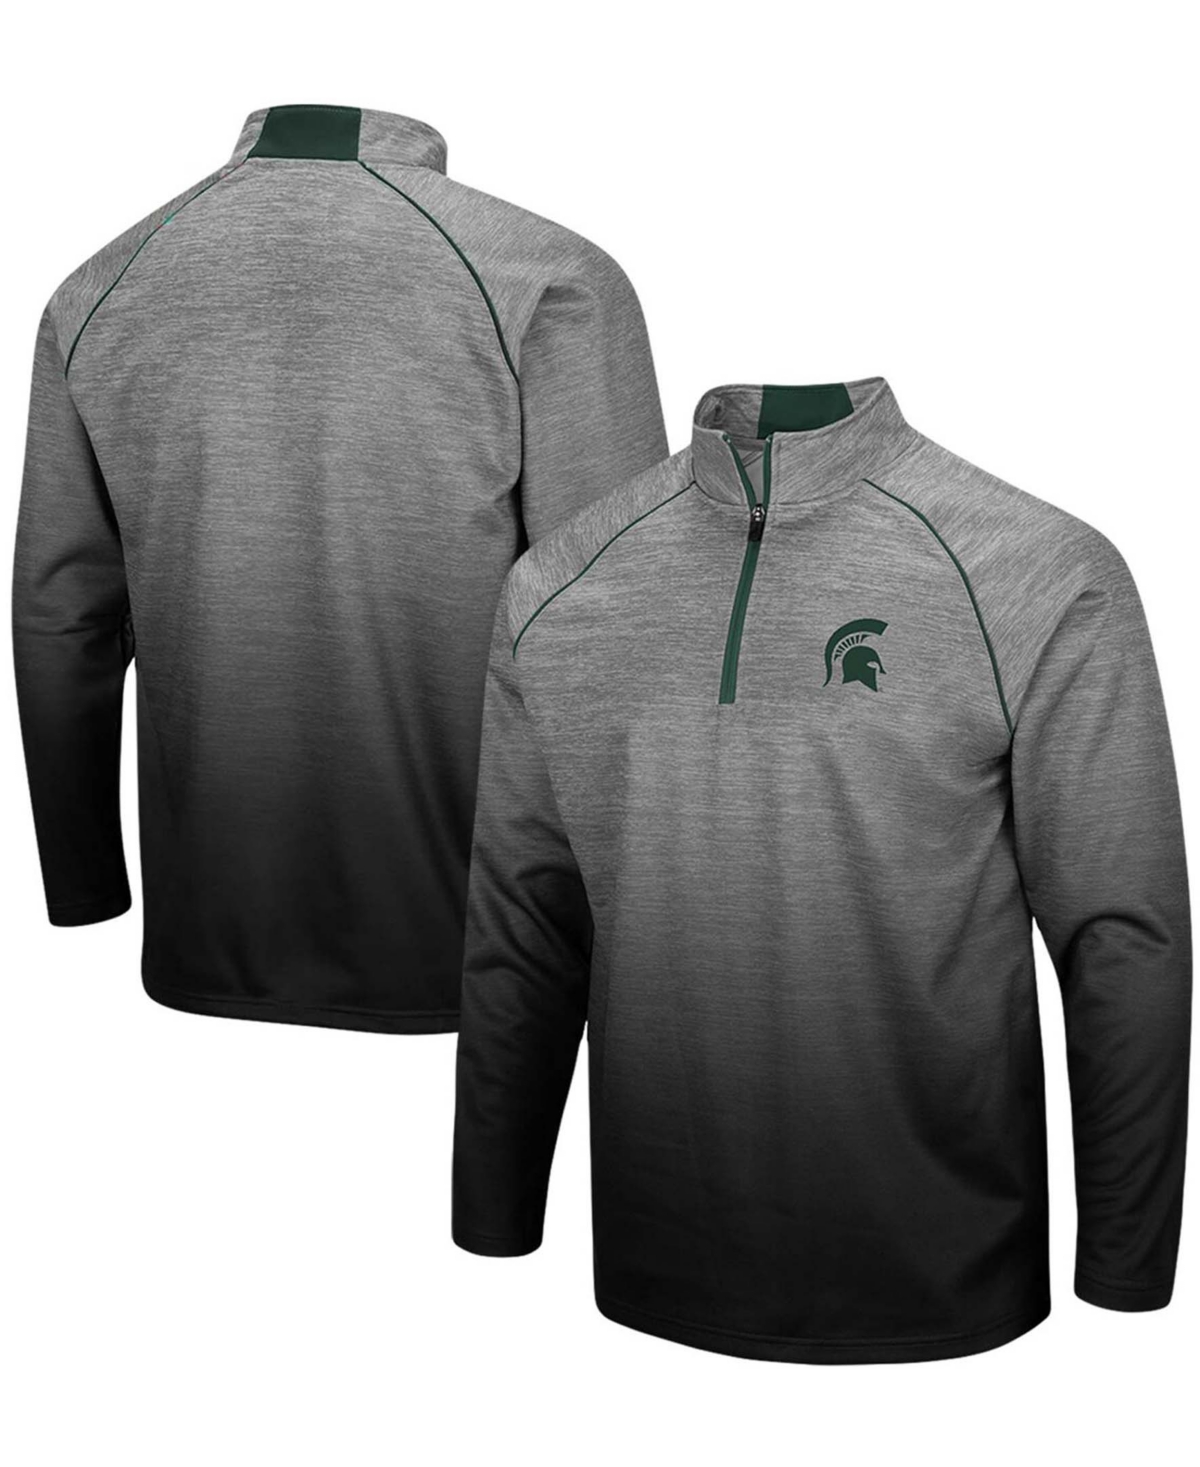 COLOSSEUM MEN'S HEATHERED GRAY MICHIGAN STATE SPARTANS SITWELL SUBLIMATED QUARTER-ZIP PULLOVER JACKET